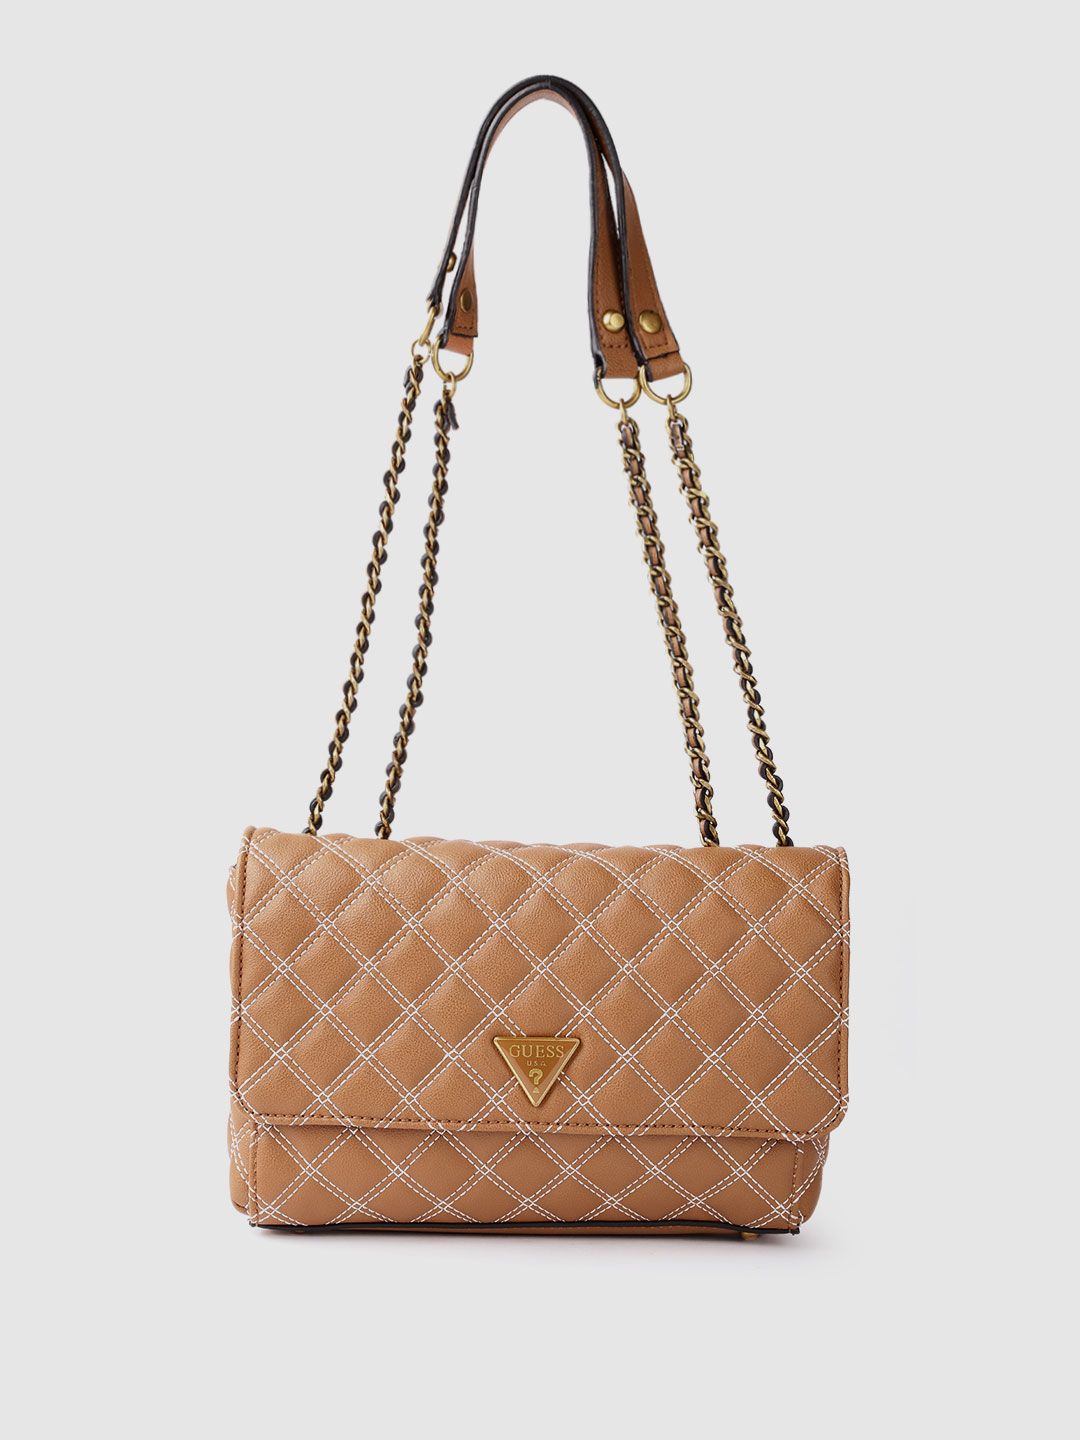 GUESS Tan Brown Quilted Structured Sling Bag Price in India